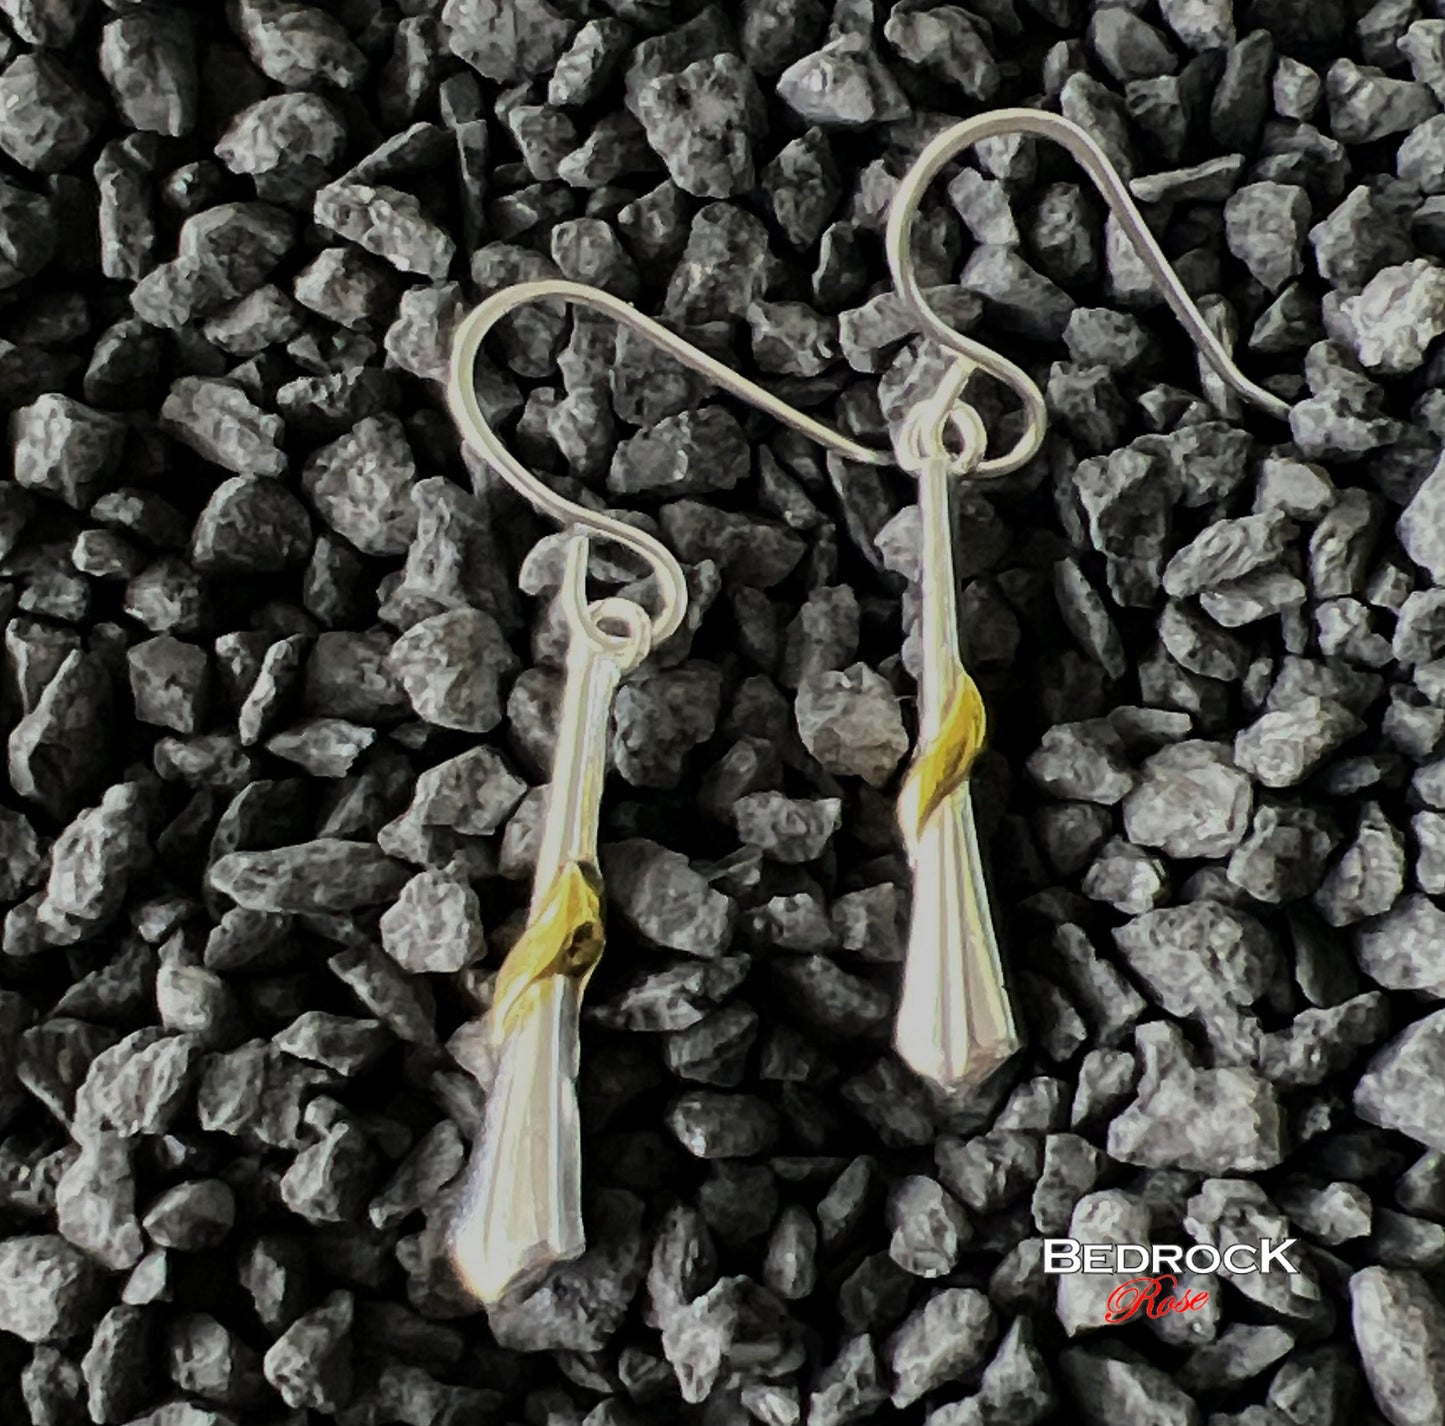 Sterling Silver and 24K Gold Dangling Teardrop Earrings, Glamorous Silver and Gold Earrings, Gift for Her, Classy Silver and Gold Dangle Earrings. Fine Jewelry.